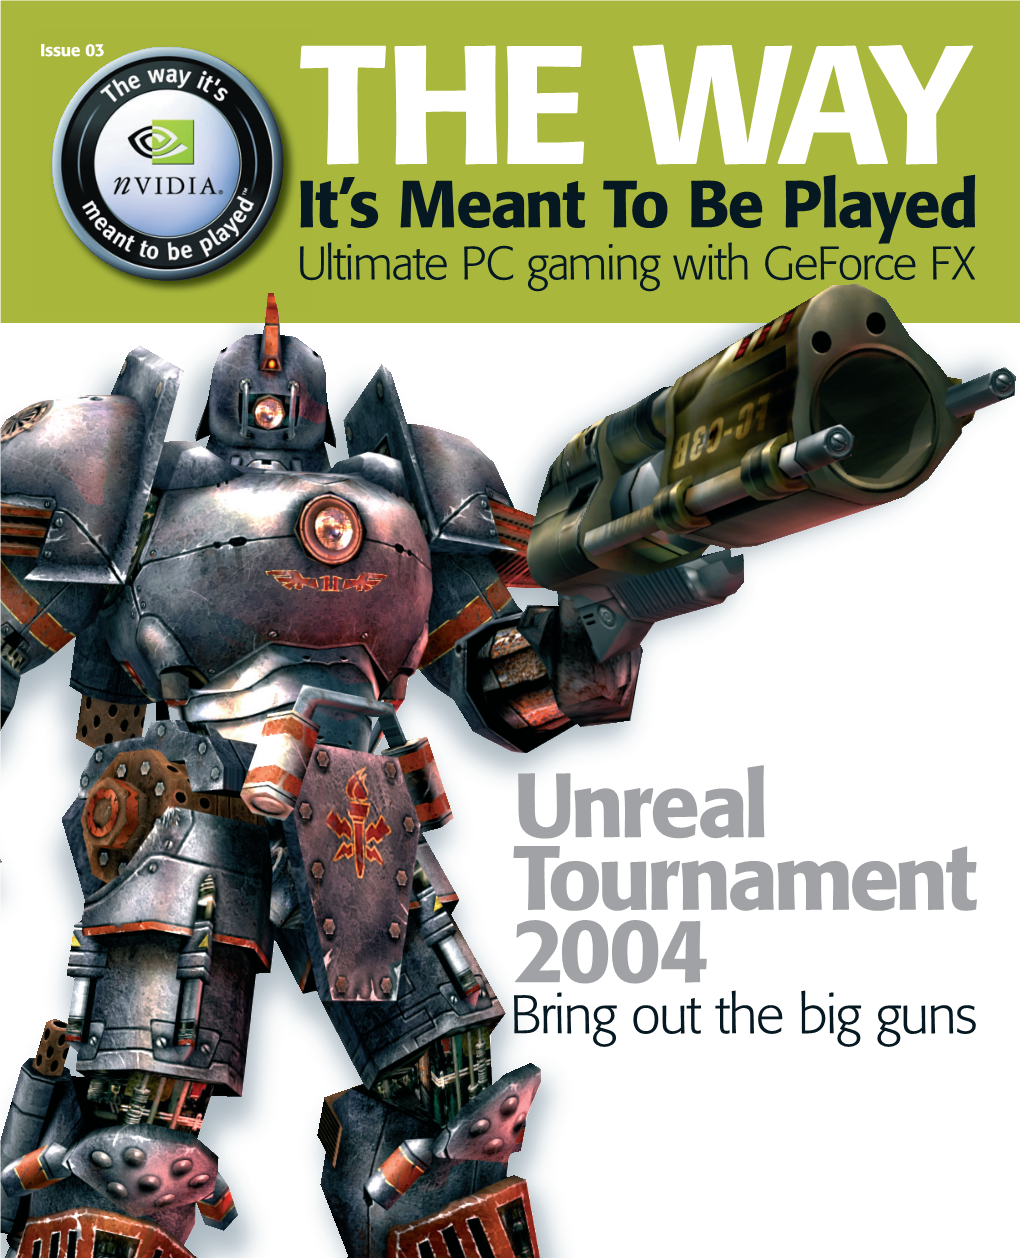 Unreal Tournament 2004 Bring out the Big Guns PCG133.Cover Nv 2 3 20/1/2004 4:55 PM Page 2